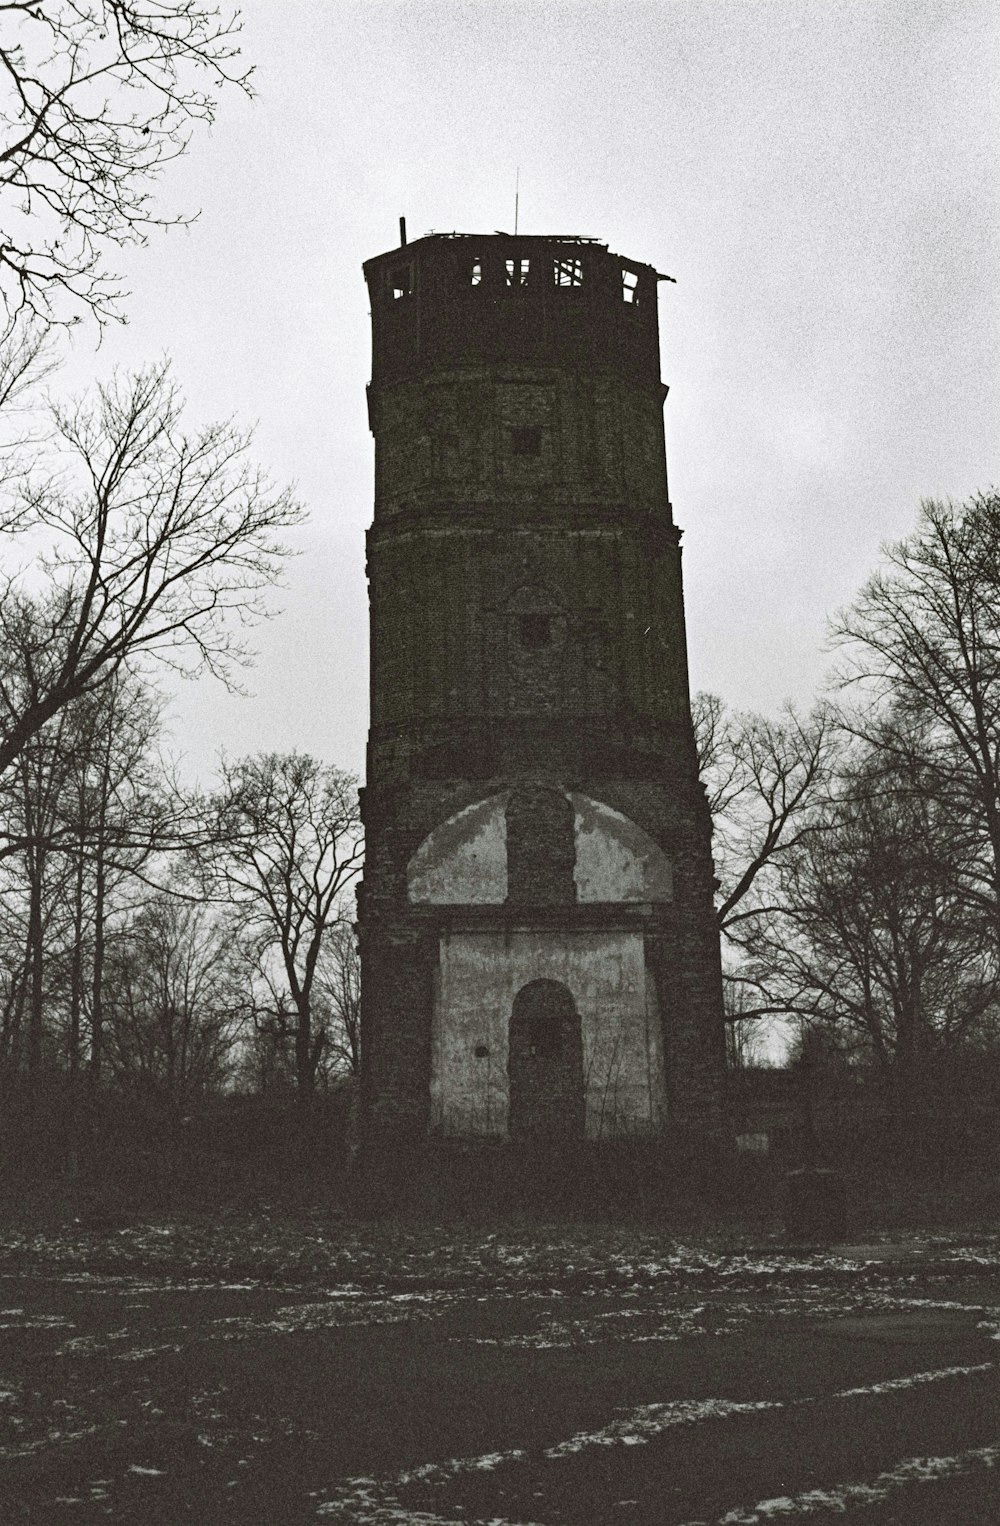 black and white tower under gray sky